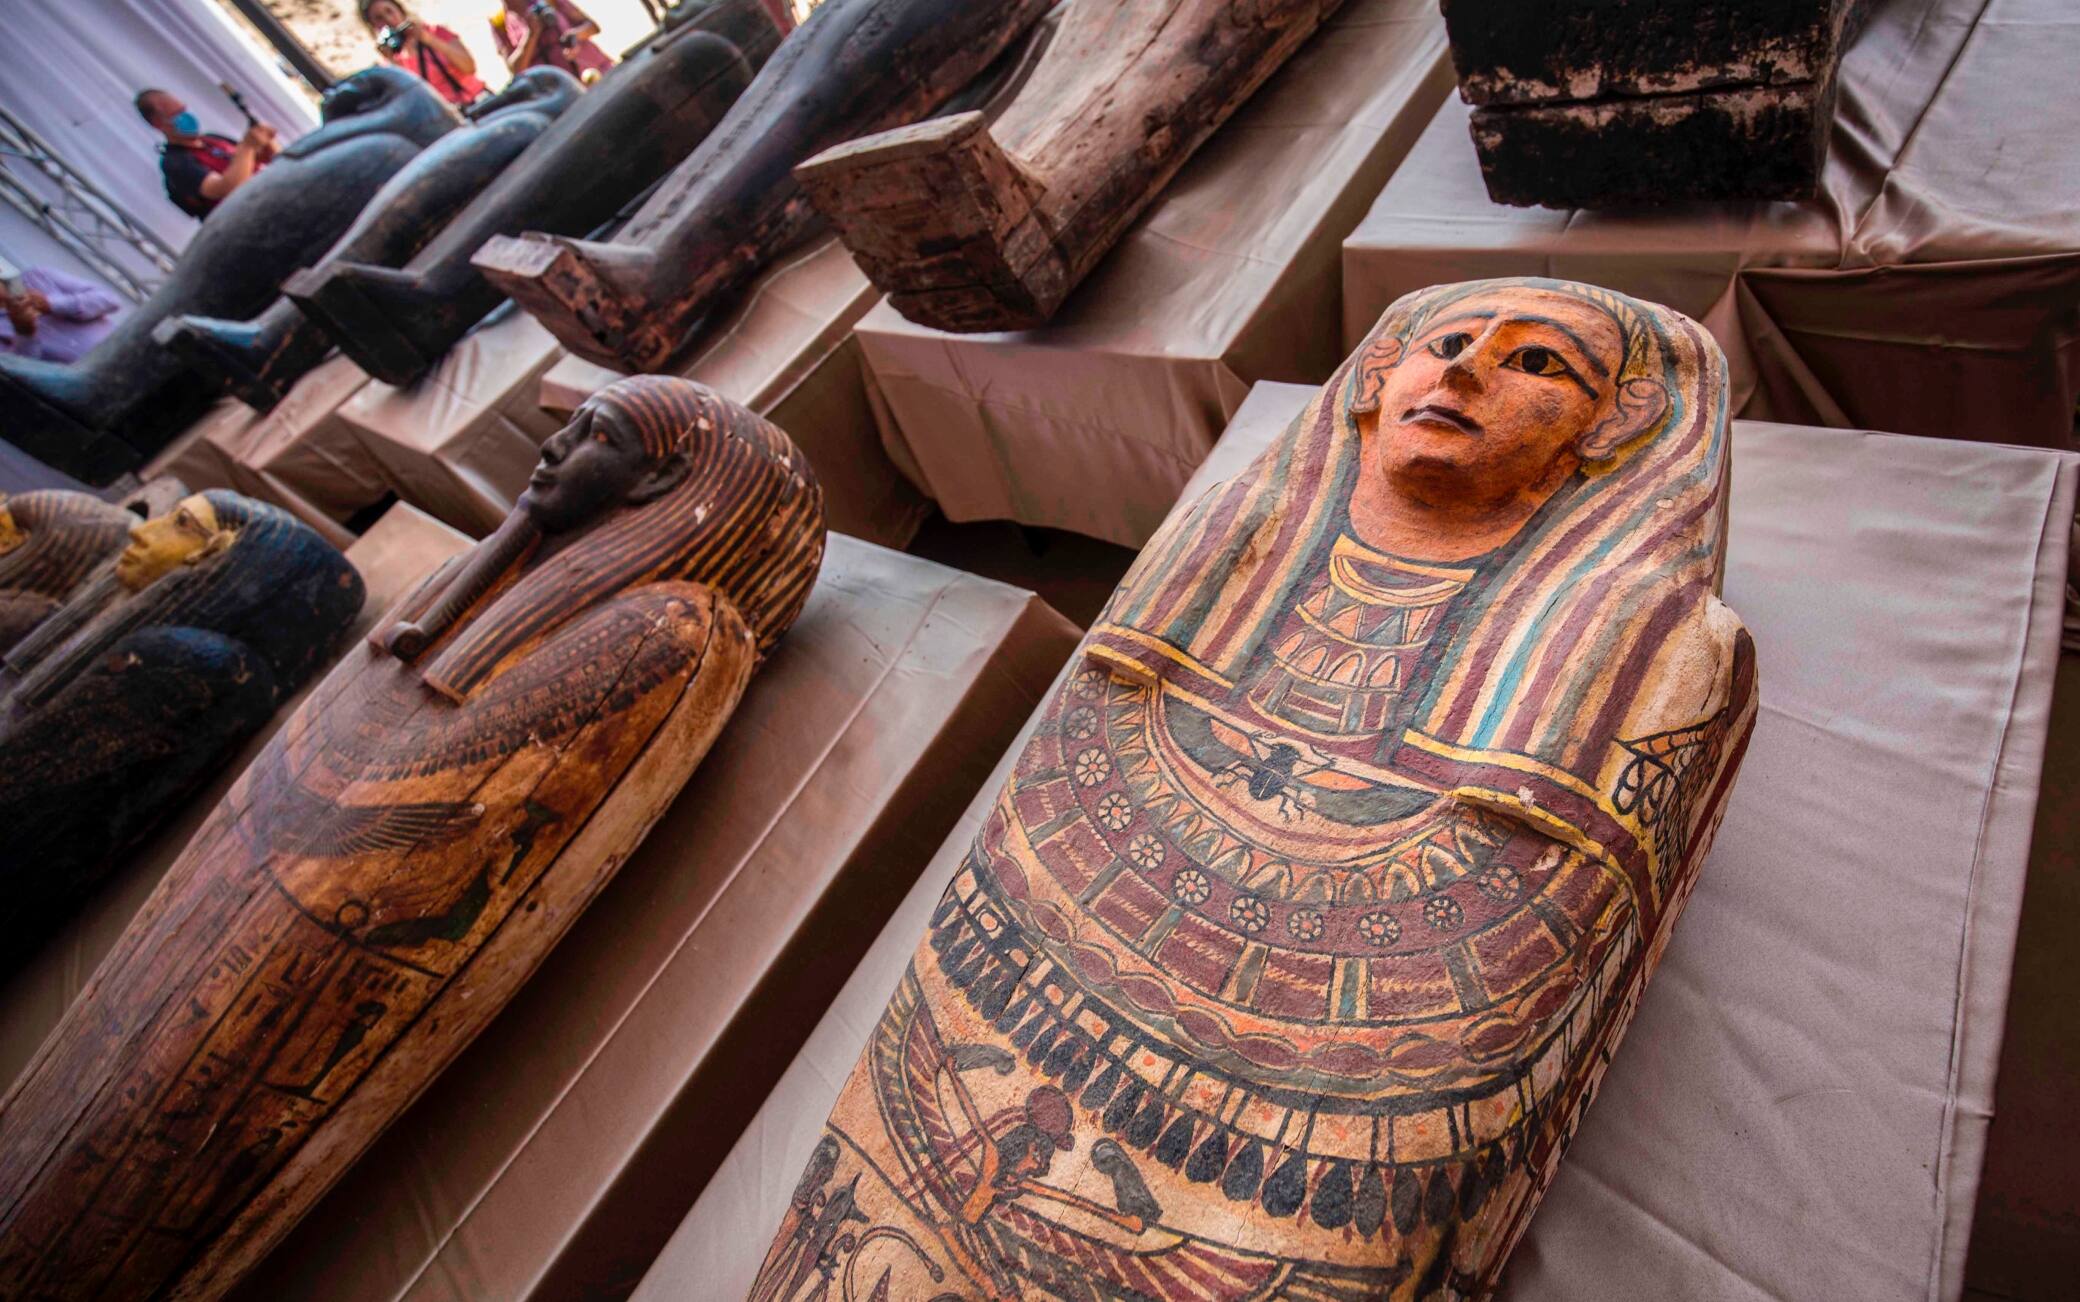 A picture taken on October 3, 2020 shows sarcophaguses, excavated by the Egyptian archaeological mission which discovered a deep burial well with more than 59 human coffins closed for more than 2,500 years, displayed during a press conference  at the Saqqara necropolis, 30 kms south of the Egyptian capital Cairo. - They were unearthed south of Cairo in the sprawling burial ground of Saqqara, the necropolis of the ancient Egyptian capital of Memphis, a UNESCO World Heritage site. Their exteriors are covered in intricate designs in vibrant colours as well as hieroglyphic pictorials. (Photo by Khaled DESOUKI / AFP) (Photo by KHALED DESOUKI/AFP via Getty Images)